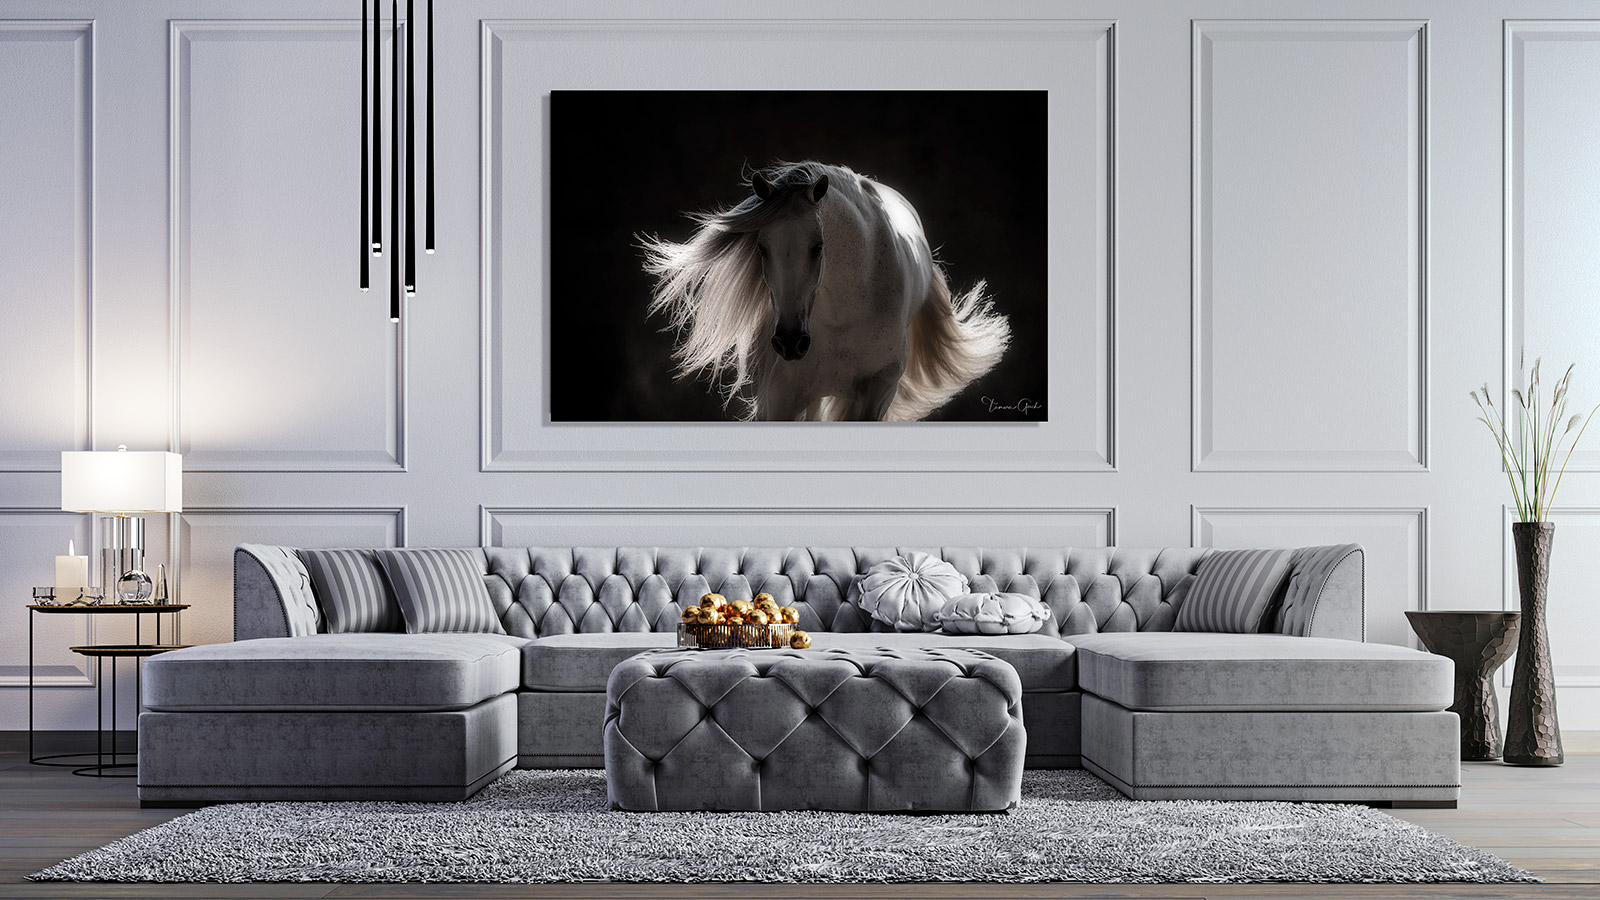 Andalusian Horse Photo Print in Black and white, shown hanging in a living room